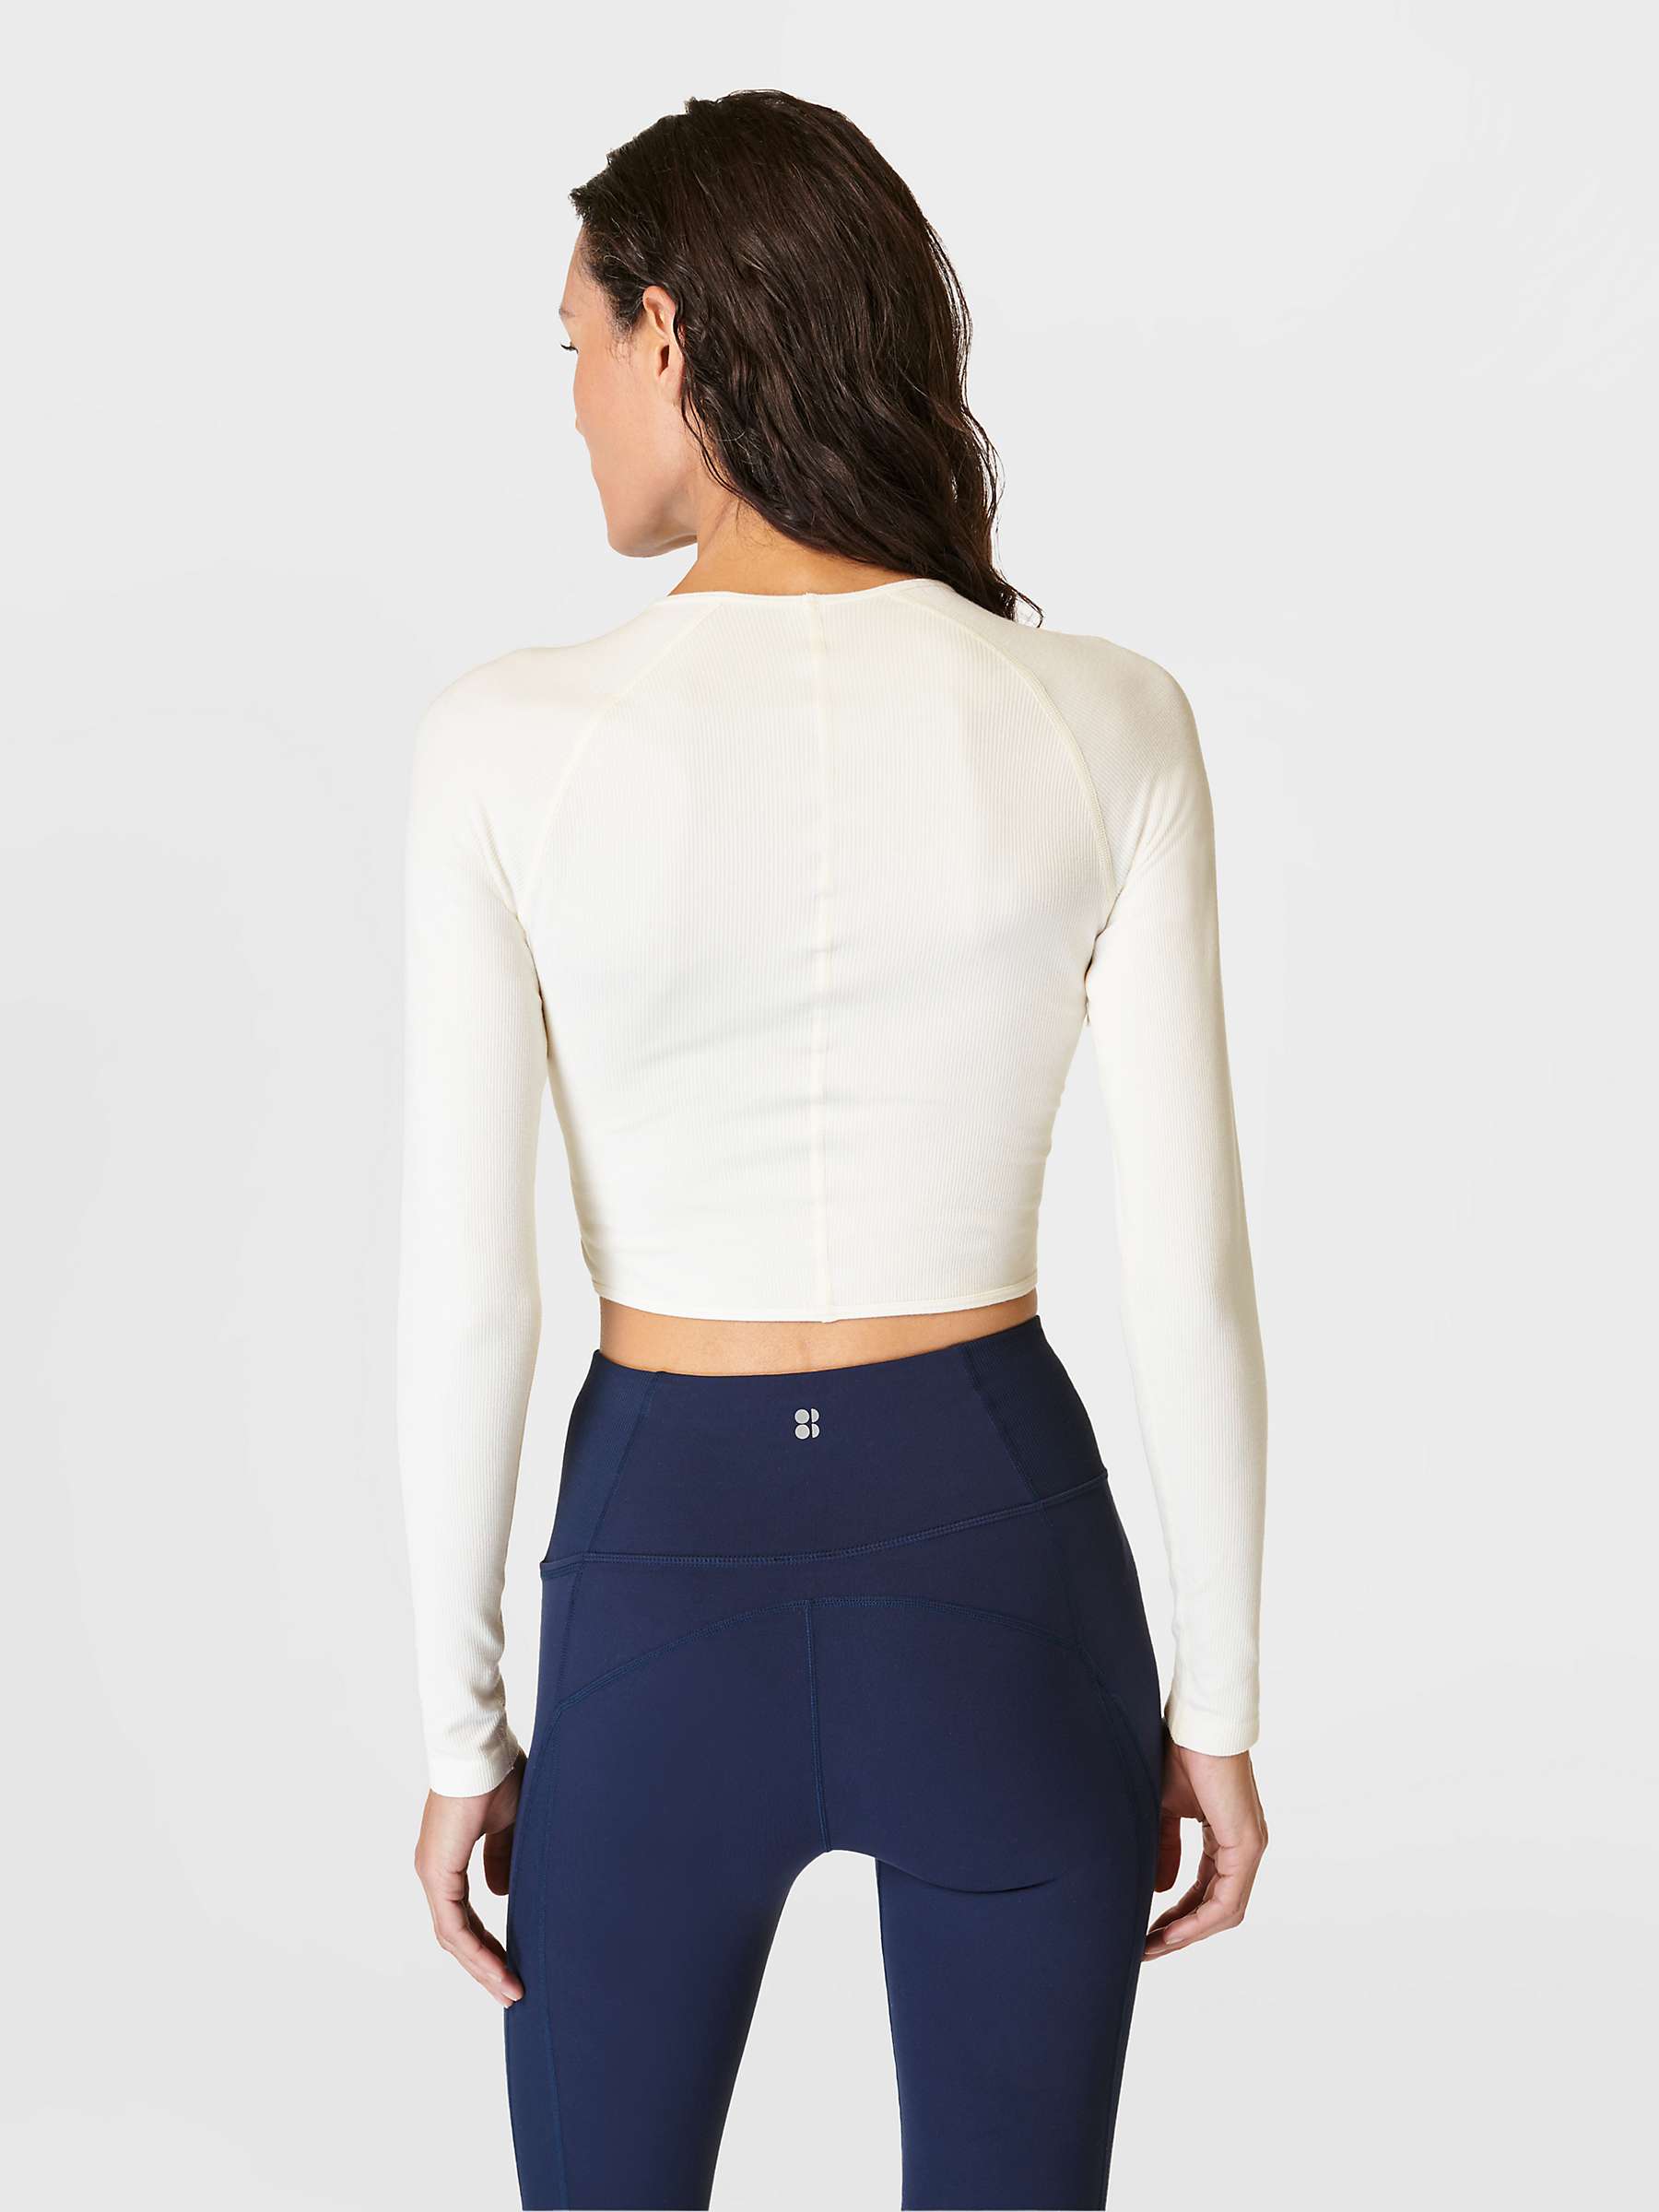 Buy Sweaty Betty Cropped Wrap Top Online at johnlewis.com